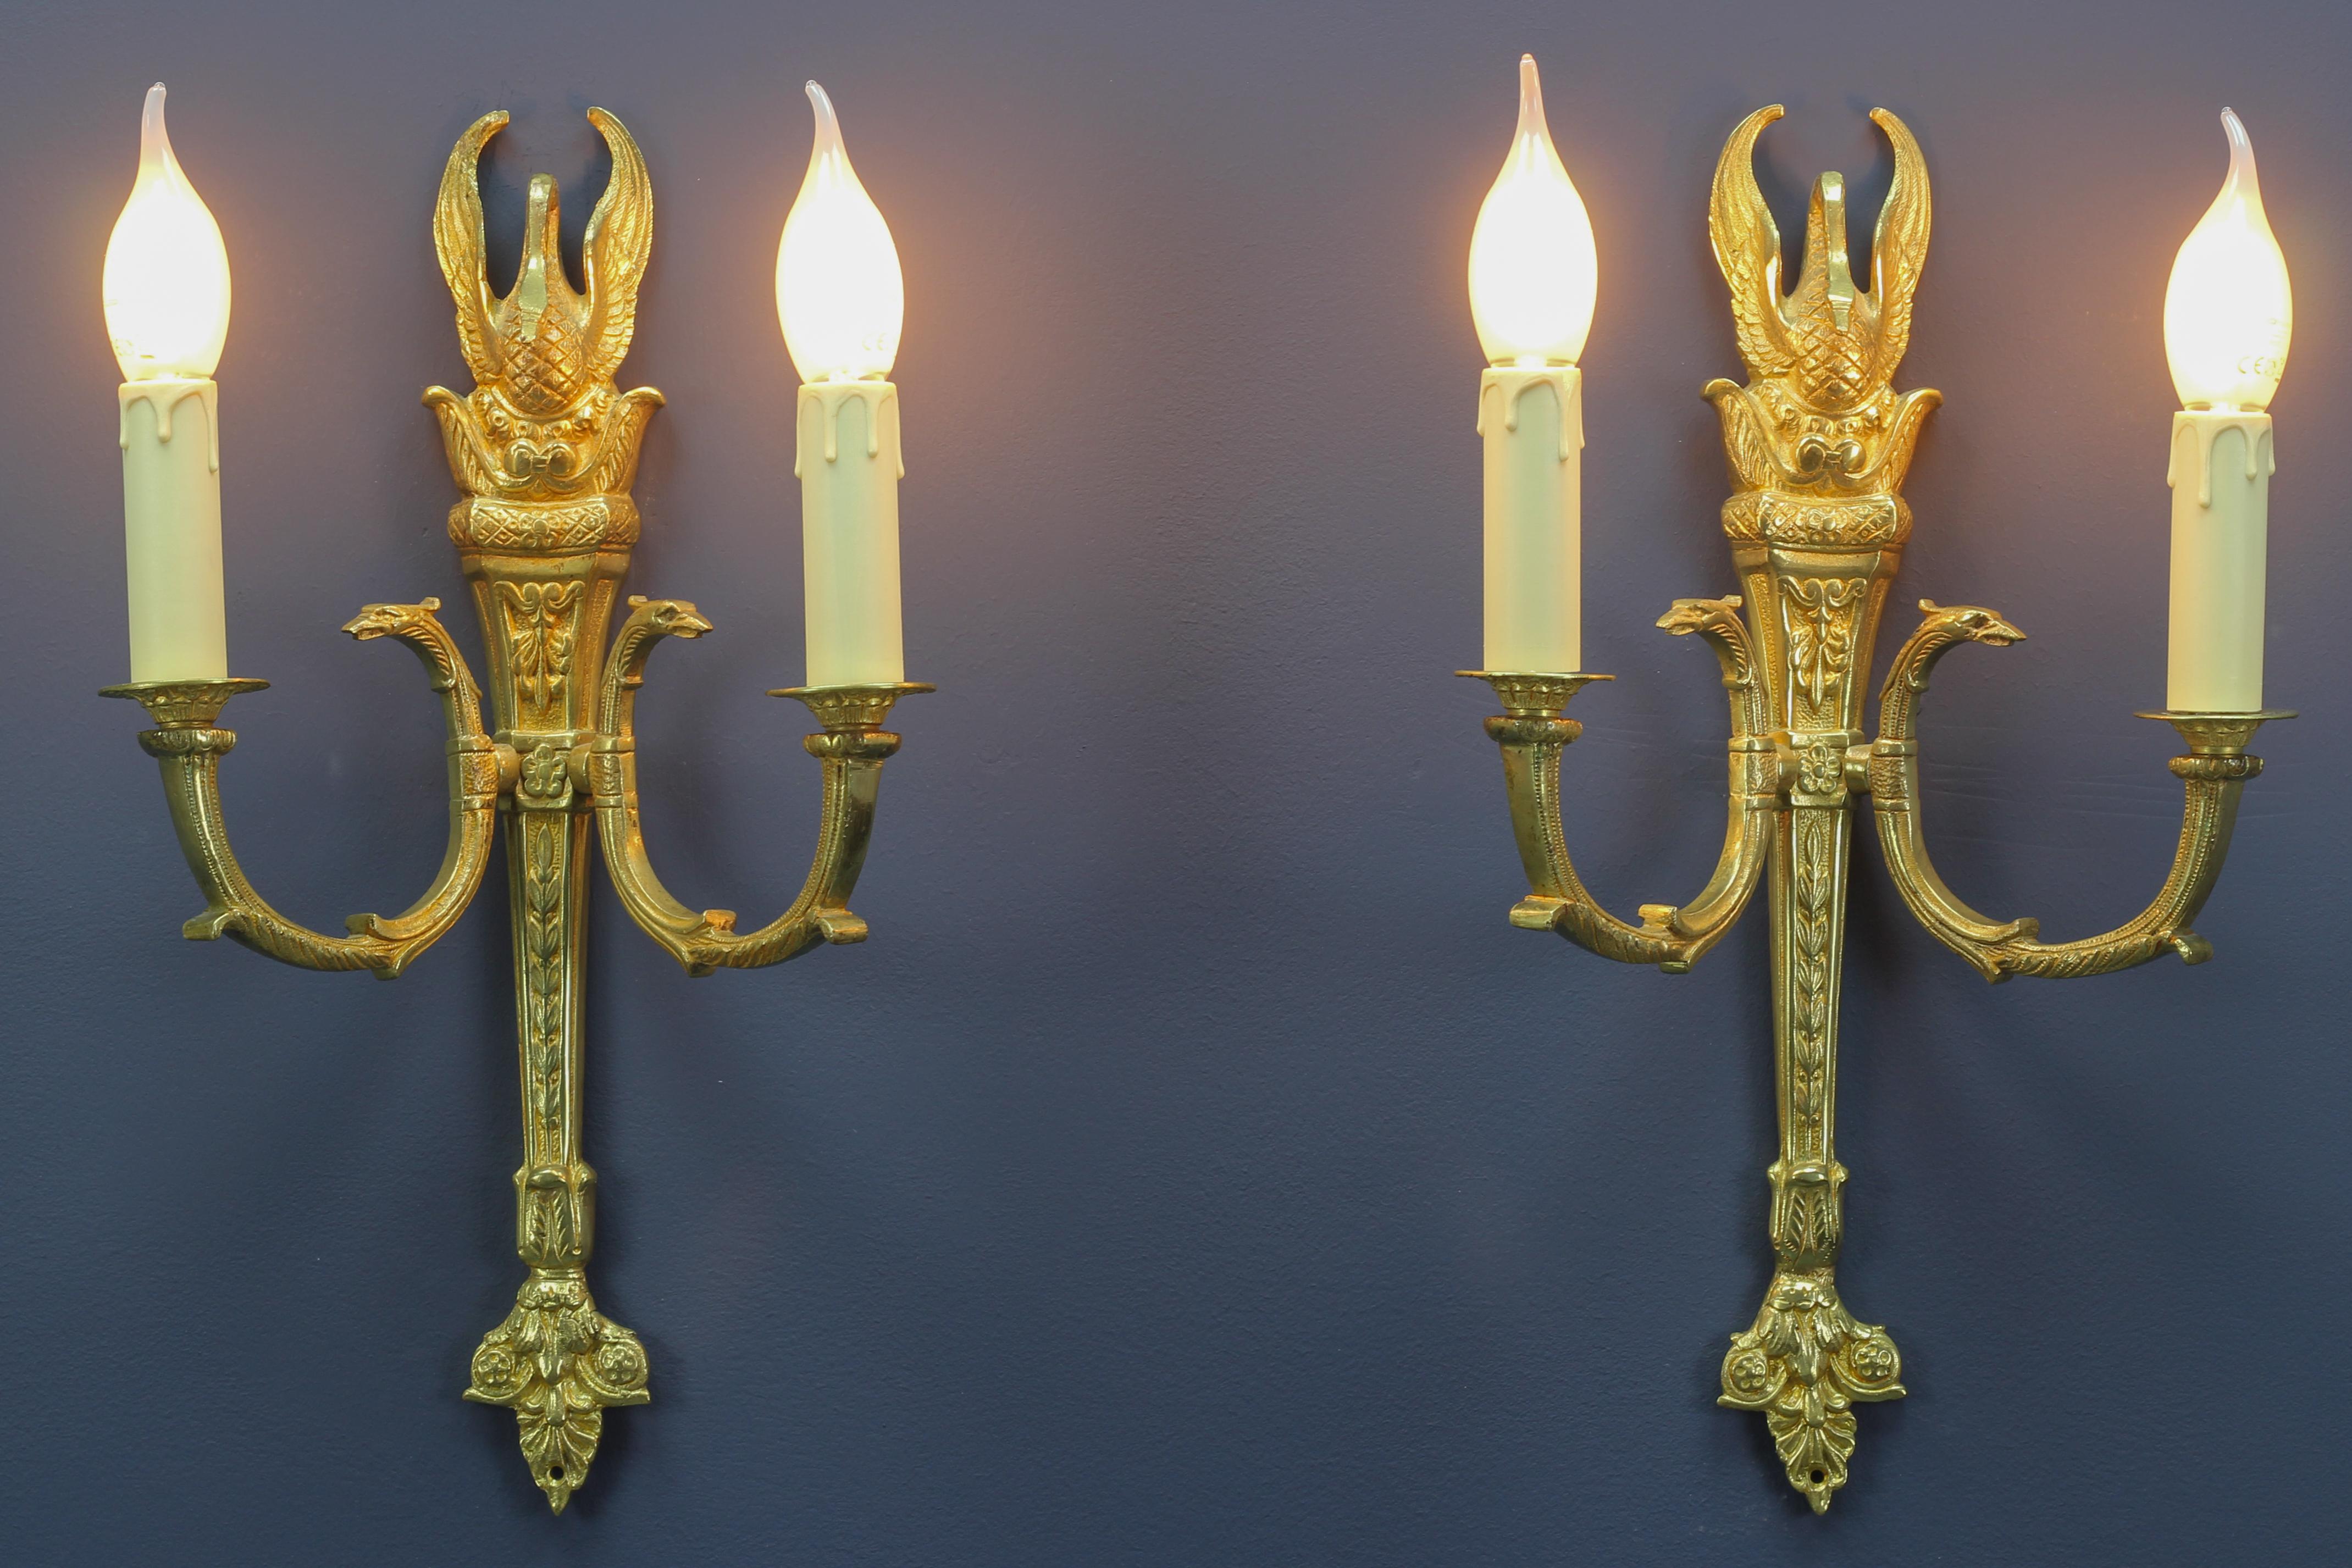 A pair of French Empire-style gilt bronze sconces. These beautiful wall lights are richly decorated with bronze details like flowers, leaves, swans, and griffin heads.
Each sconce has two arms and each with a new socket for an E 14 size light